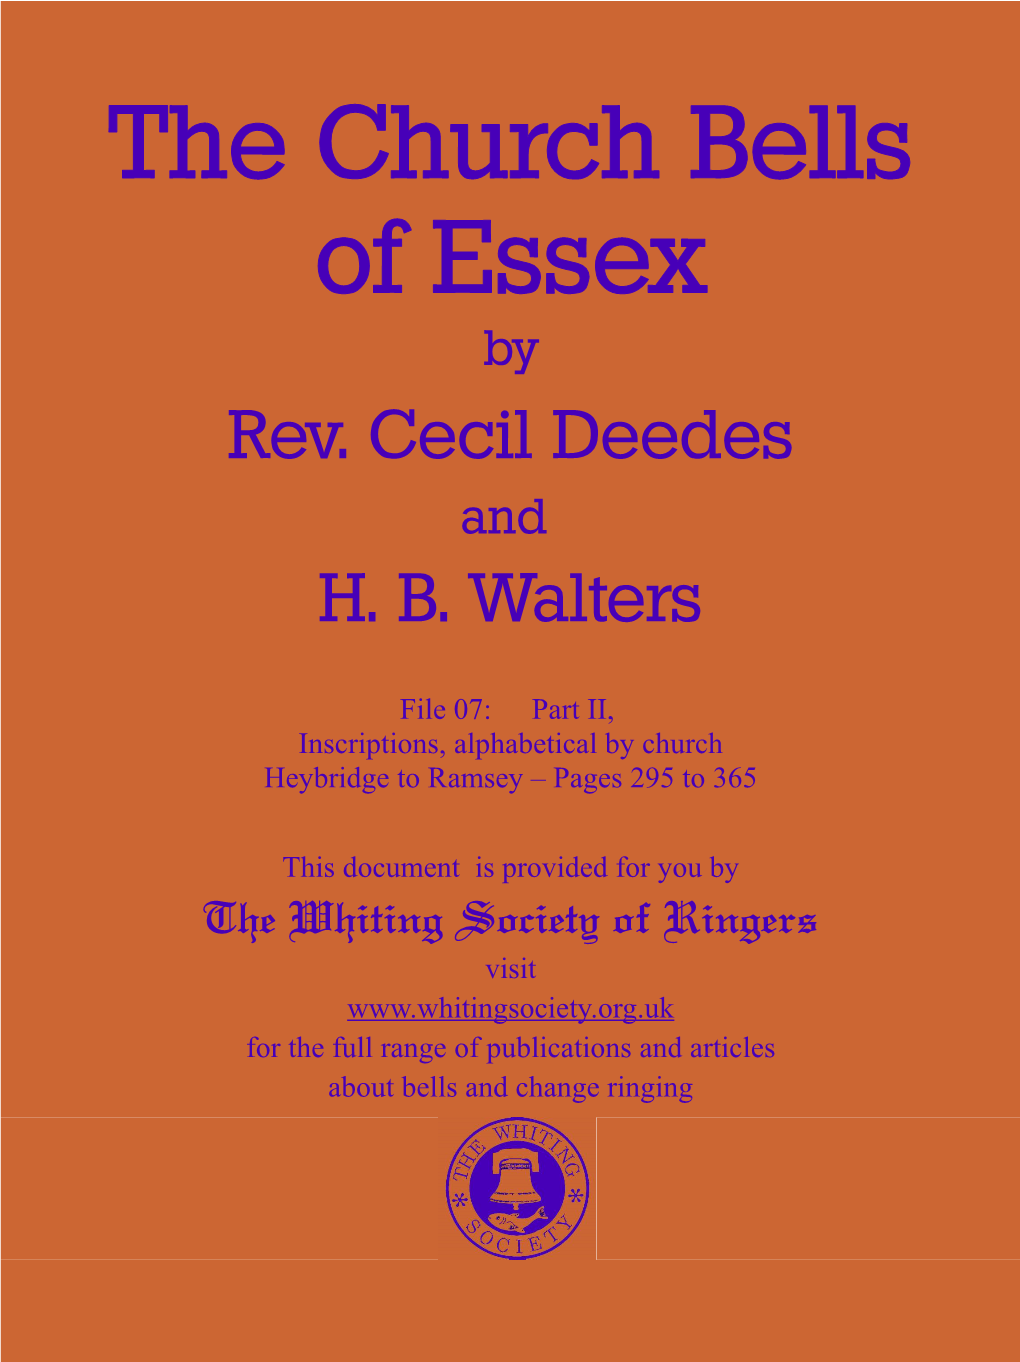 The Church Bells of Essex by Rev